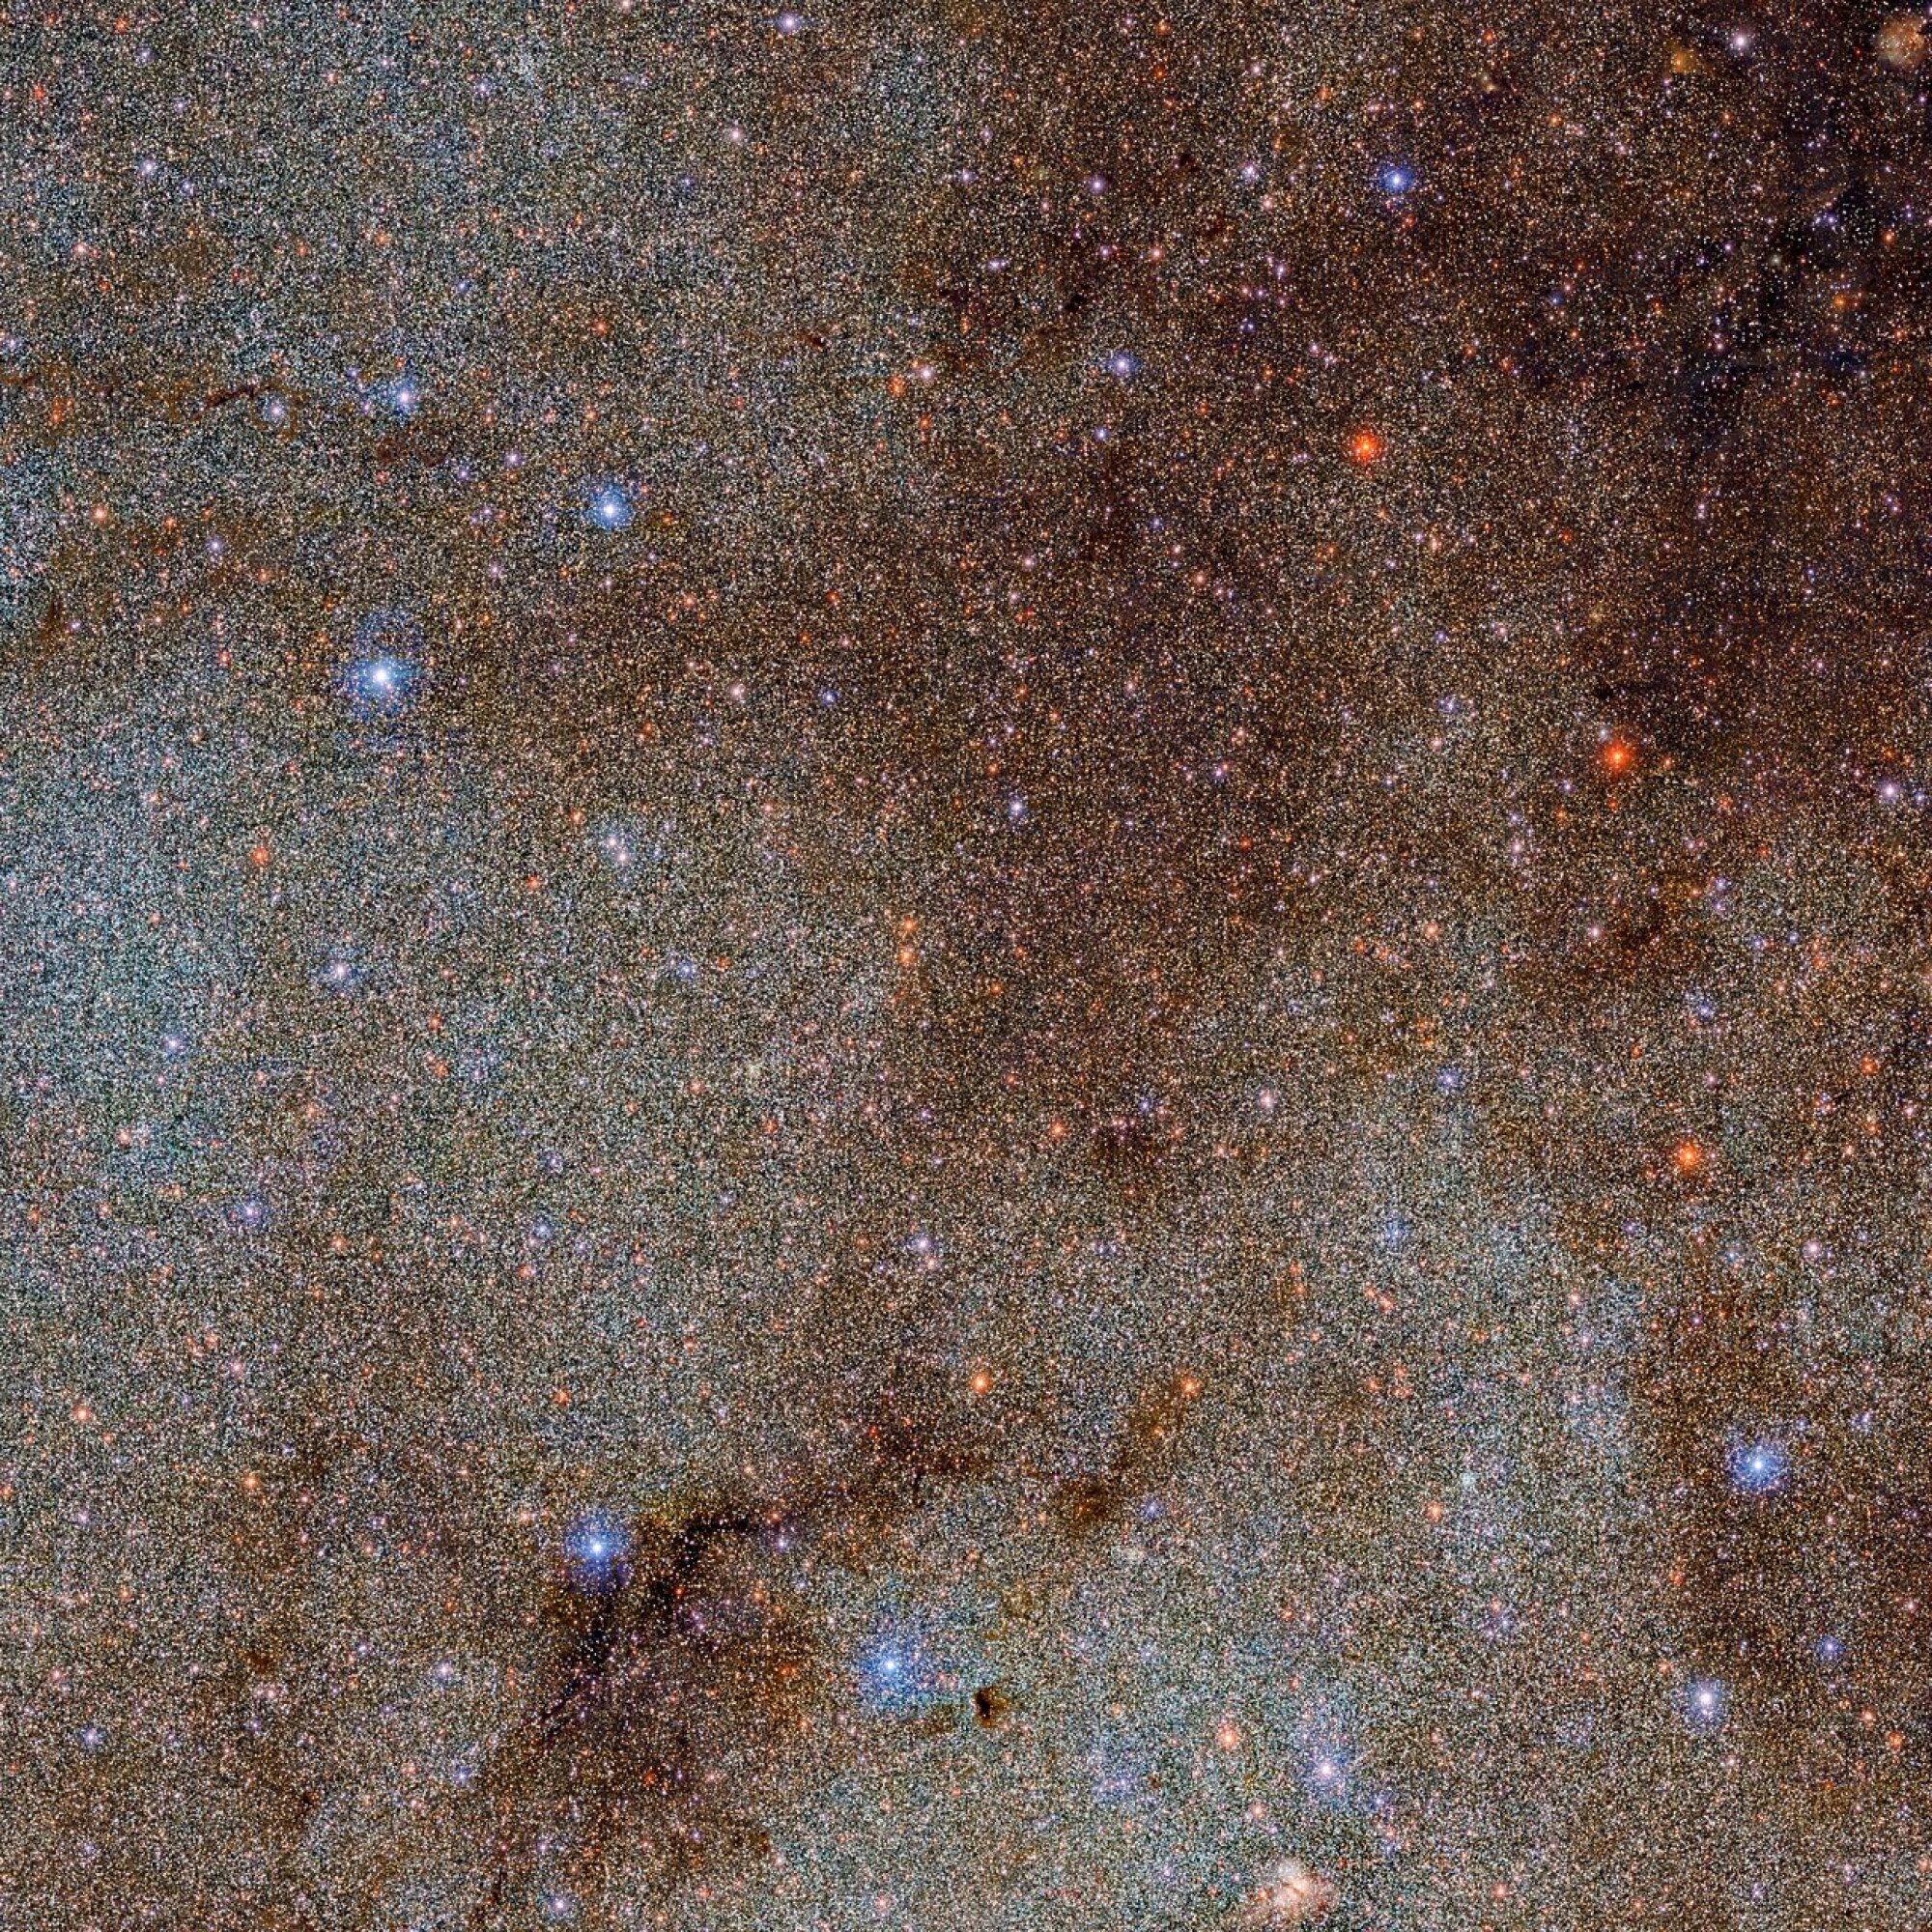 billions of objects in the Milky Way galaxy